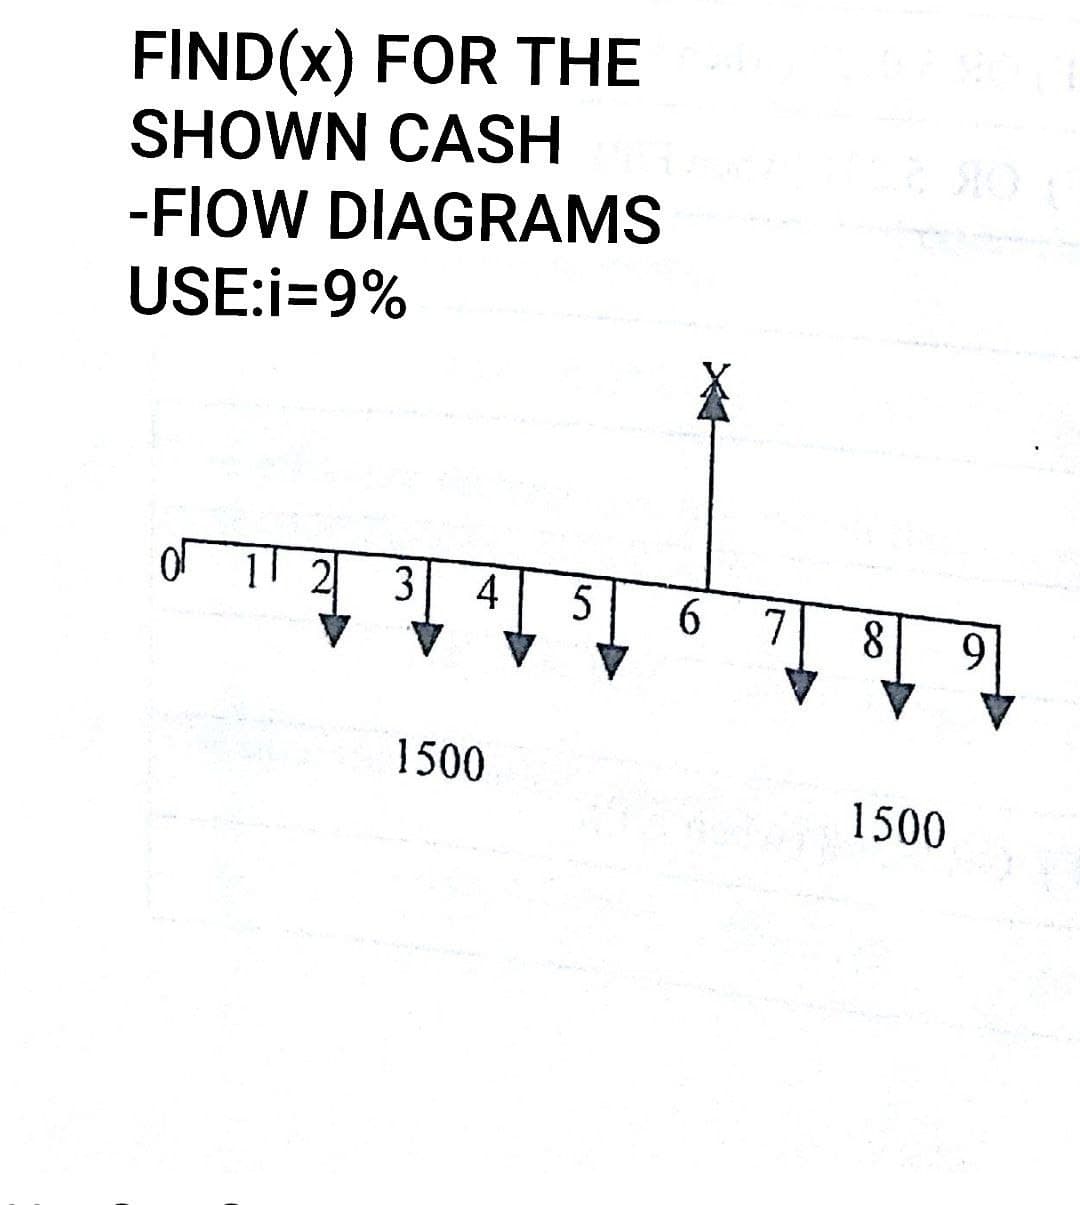 FIND(x) FOR THE
SHOWN CASH
-FIOW DIAGRAMS
USE:i=9%
2
3 4
1500
5
6 7
8
1500
9